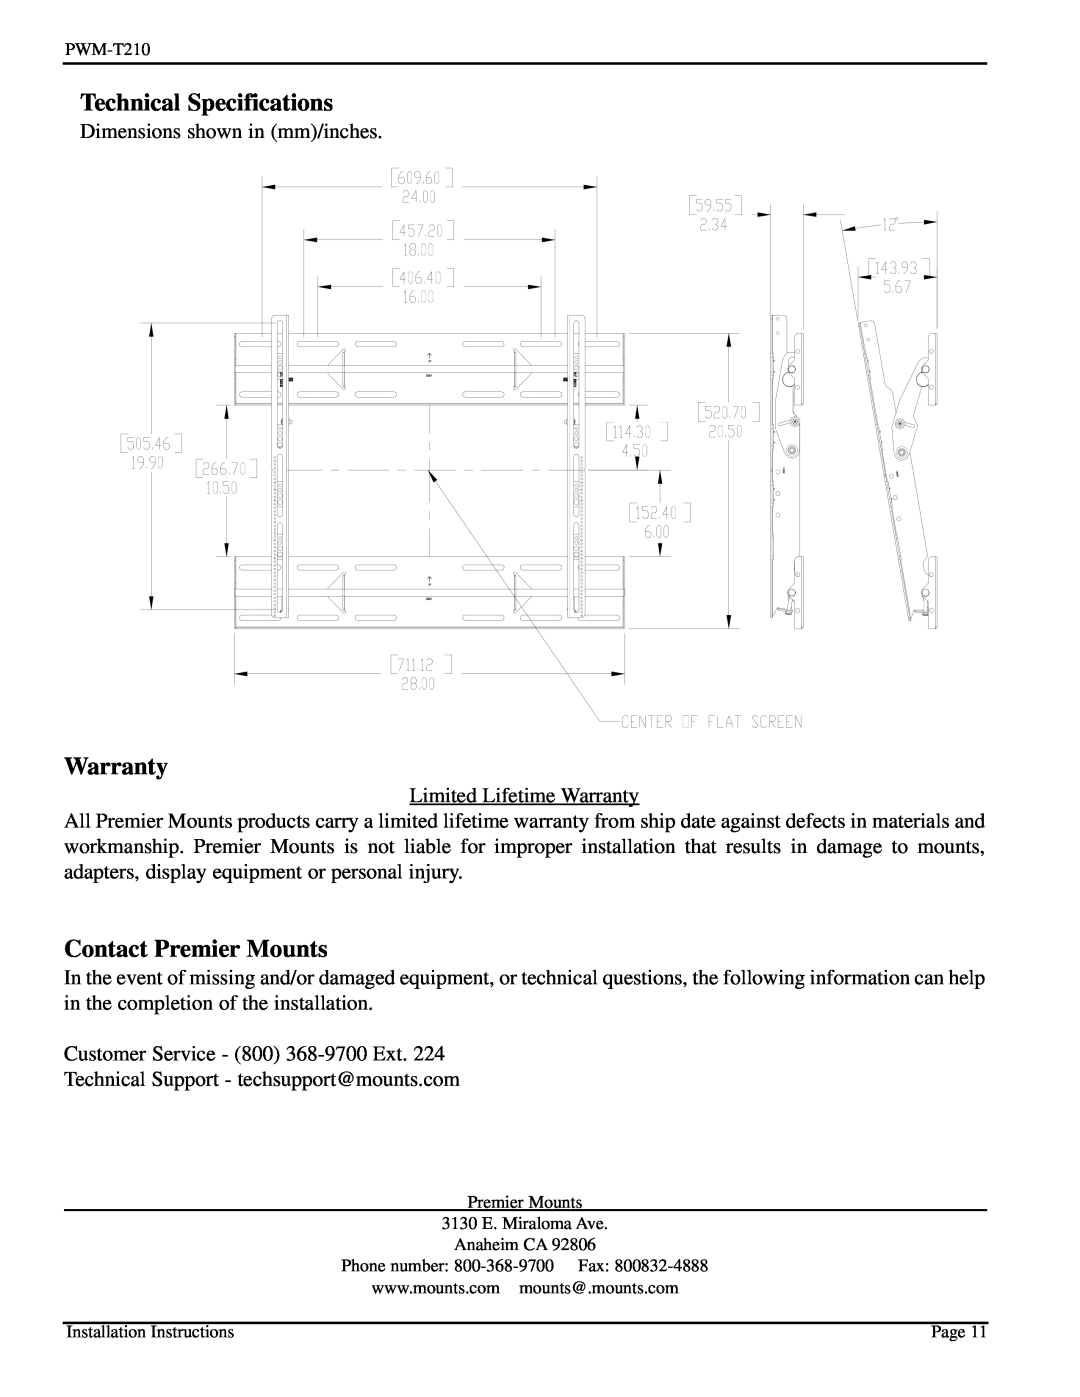 Pioneer PWM-T210 installation instructions Technical Specifications, Warranty, Contact Premier Mounts 